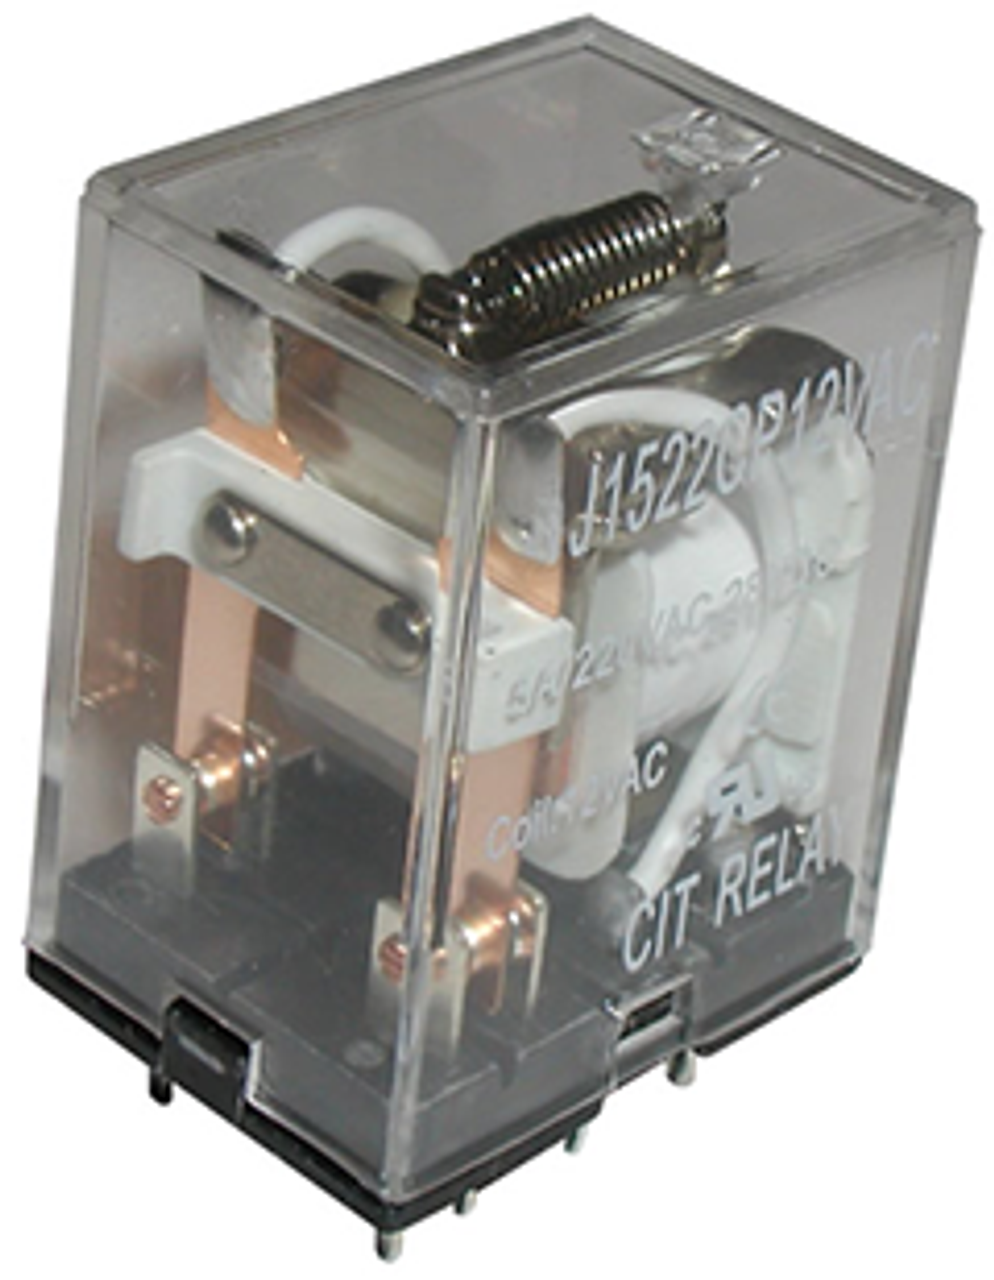 CIT Relay and Switch J1524CP24VACDT Industrial Relays